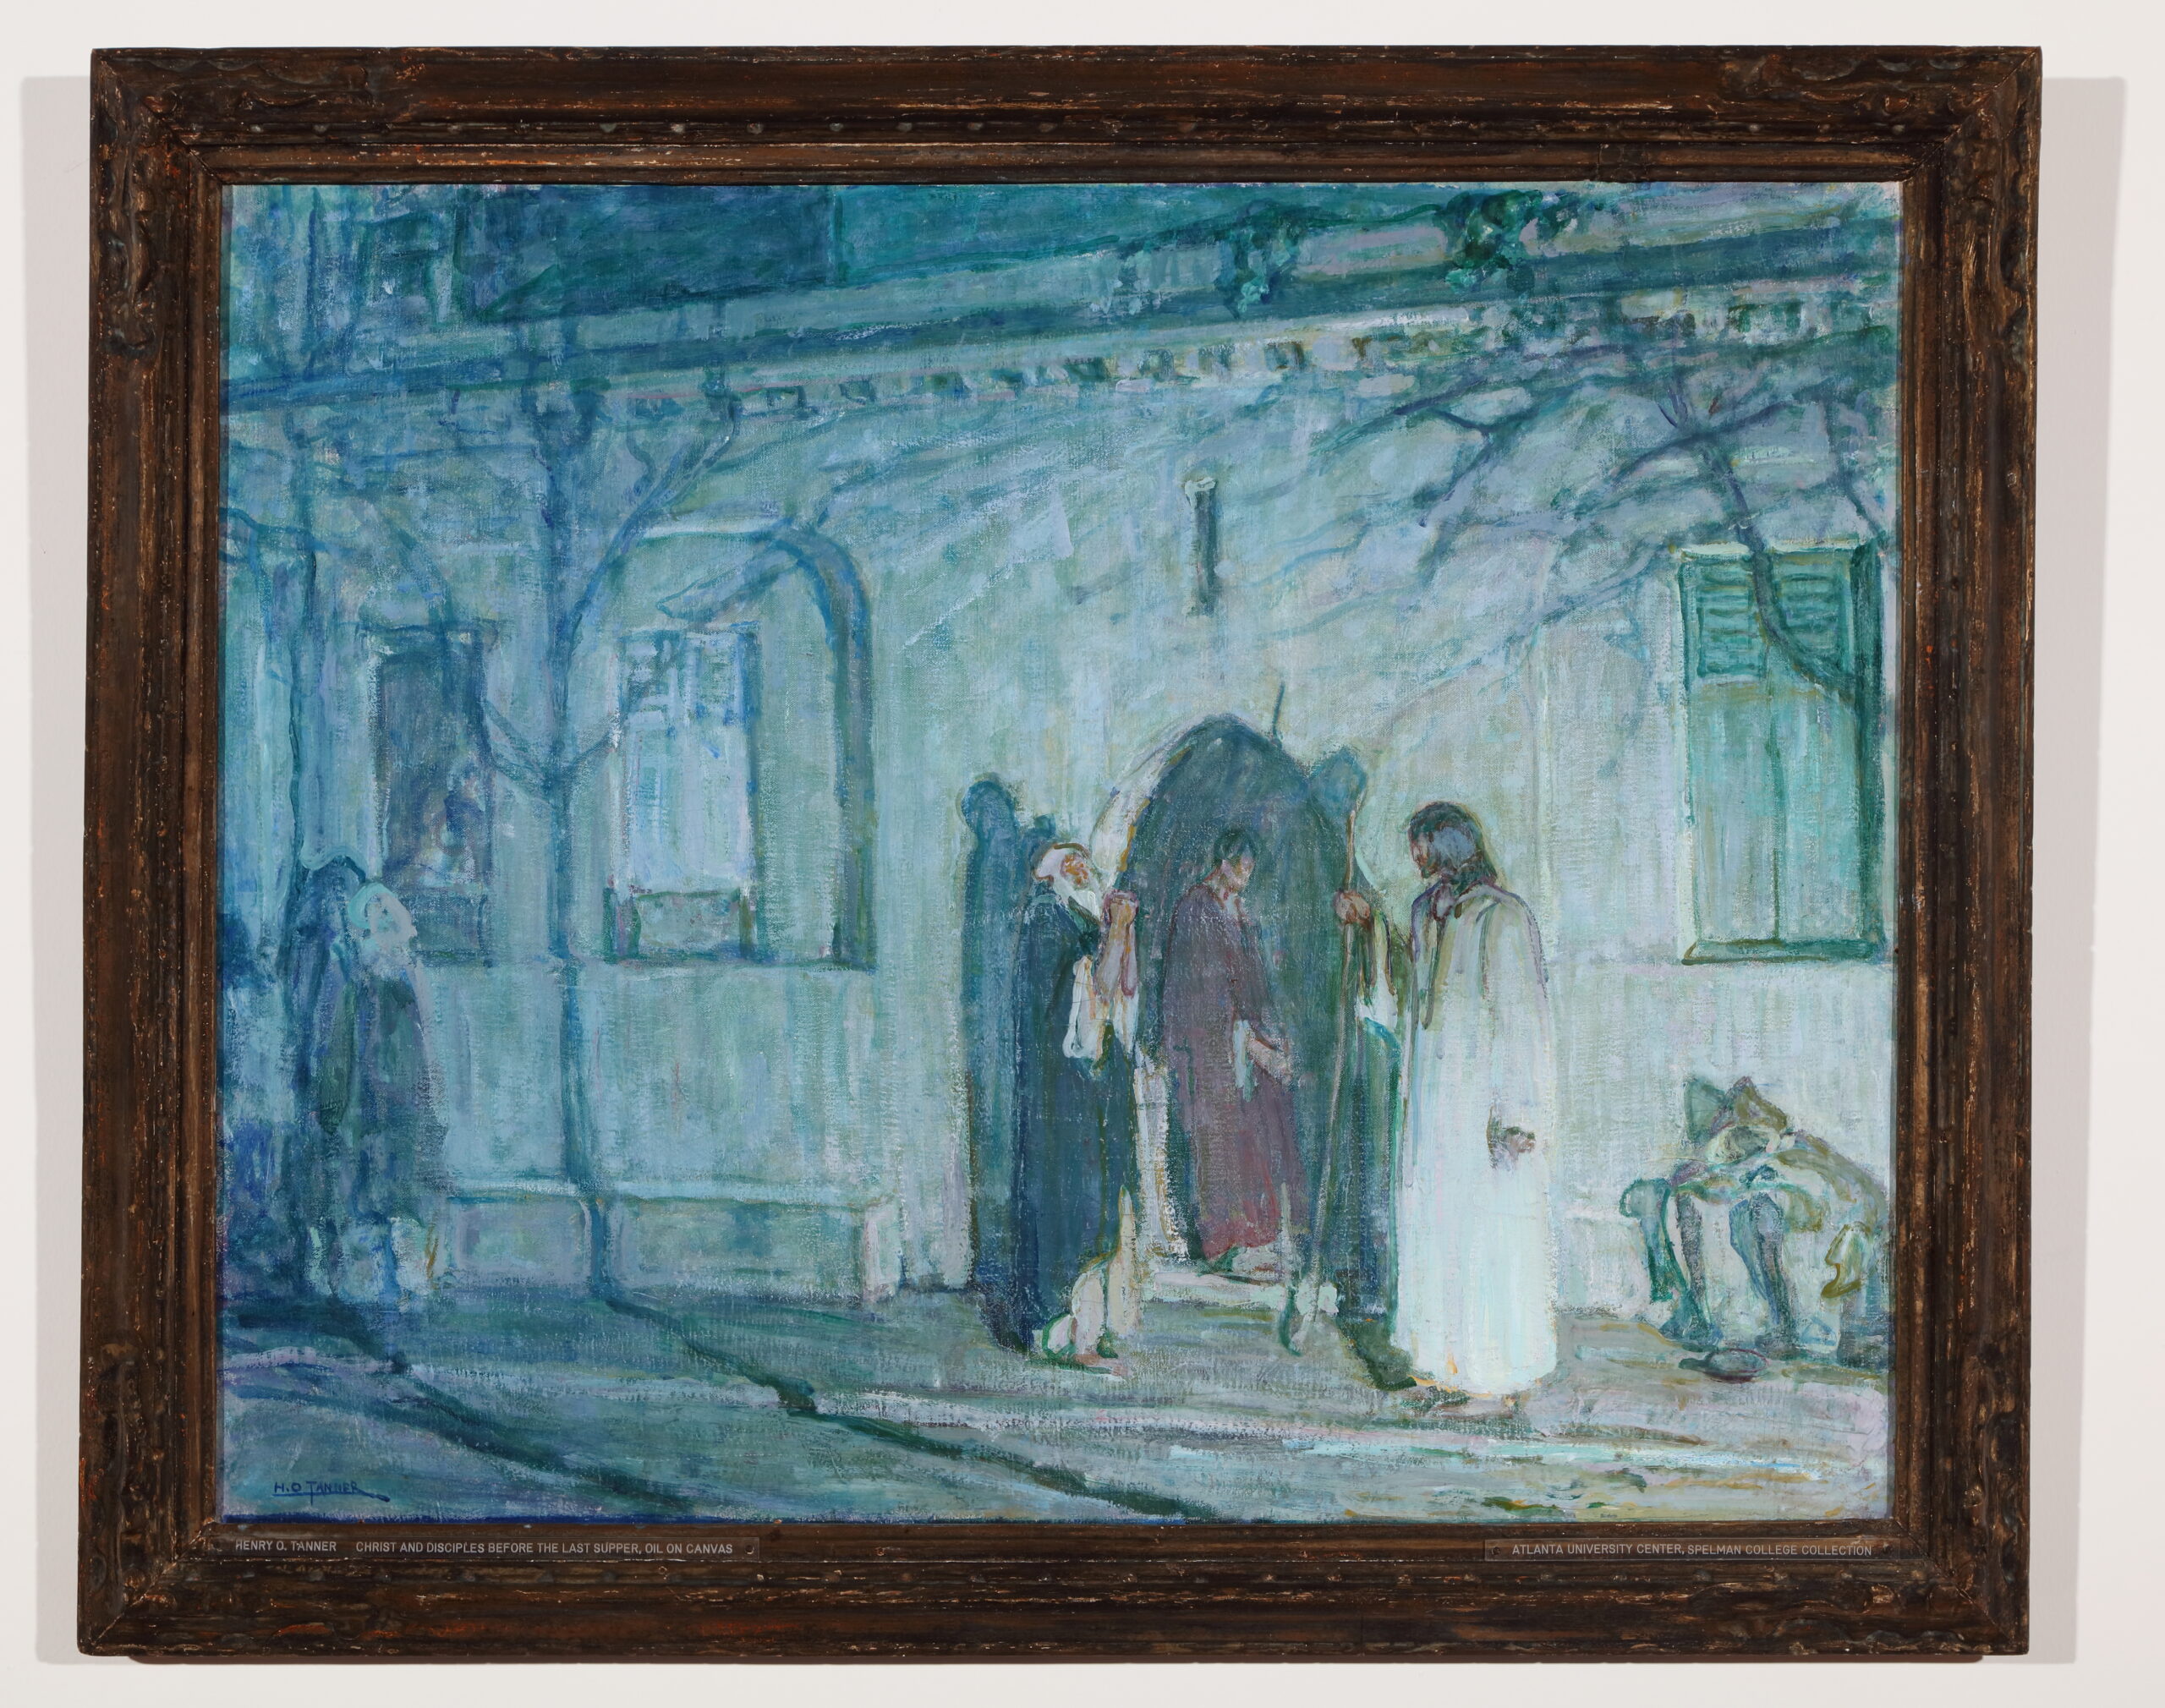 Henry Ossawa Tanner (1859 - 1969), Christ and His Disciples Before the Last Supper, 1908-1909, oil on canvas, 36 1/2 x 30 1/8 in. Spelman College Museum of Fine Art. Gift of Catherine and Chauncey Waddell.